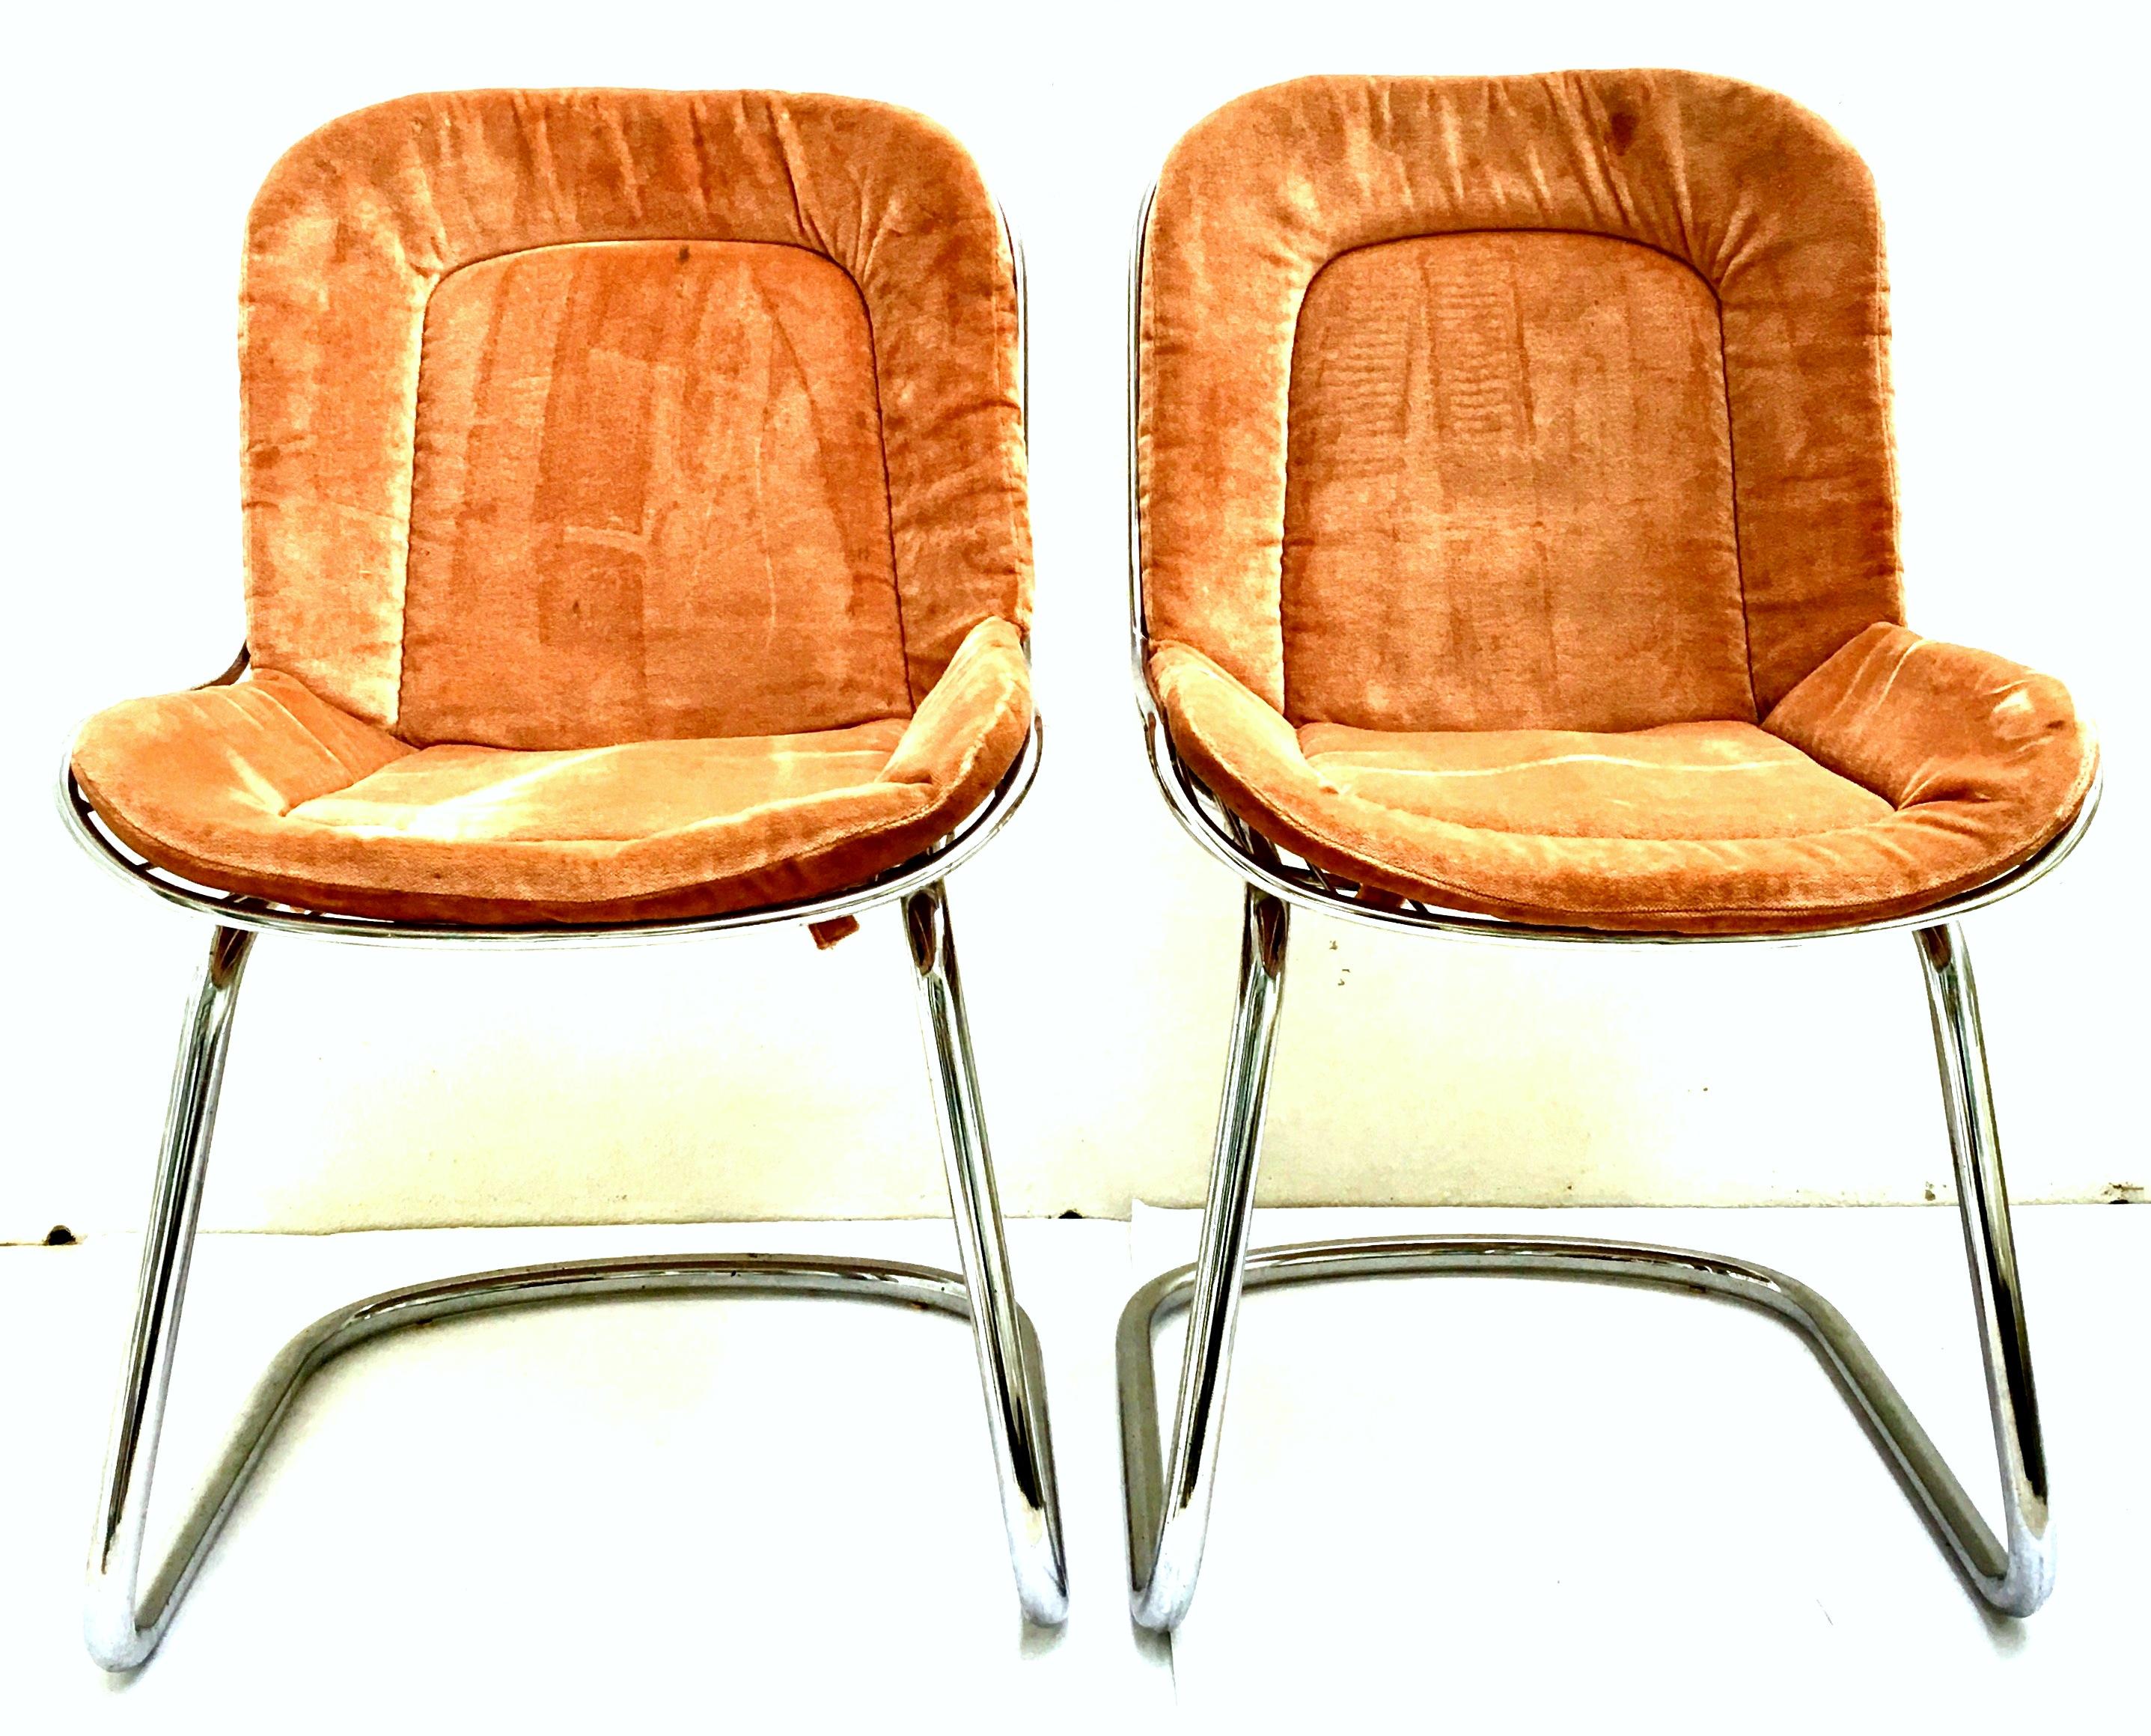 1960's Pair of Italian Gastone Rinaldi style chrome tubular wire slipper side chairs. Includes, original pair of orange velvet removable one piece (seat & back) cushions.